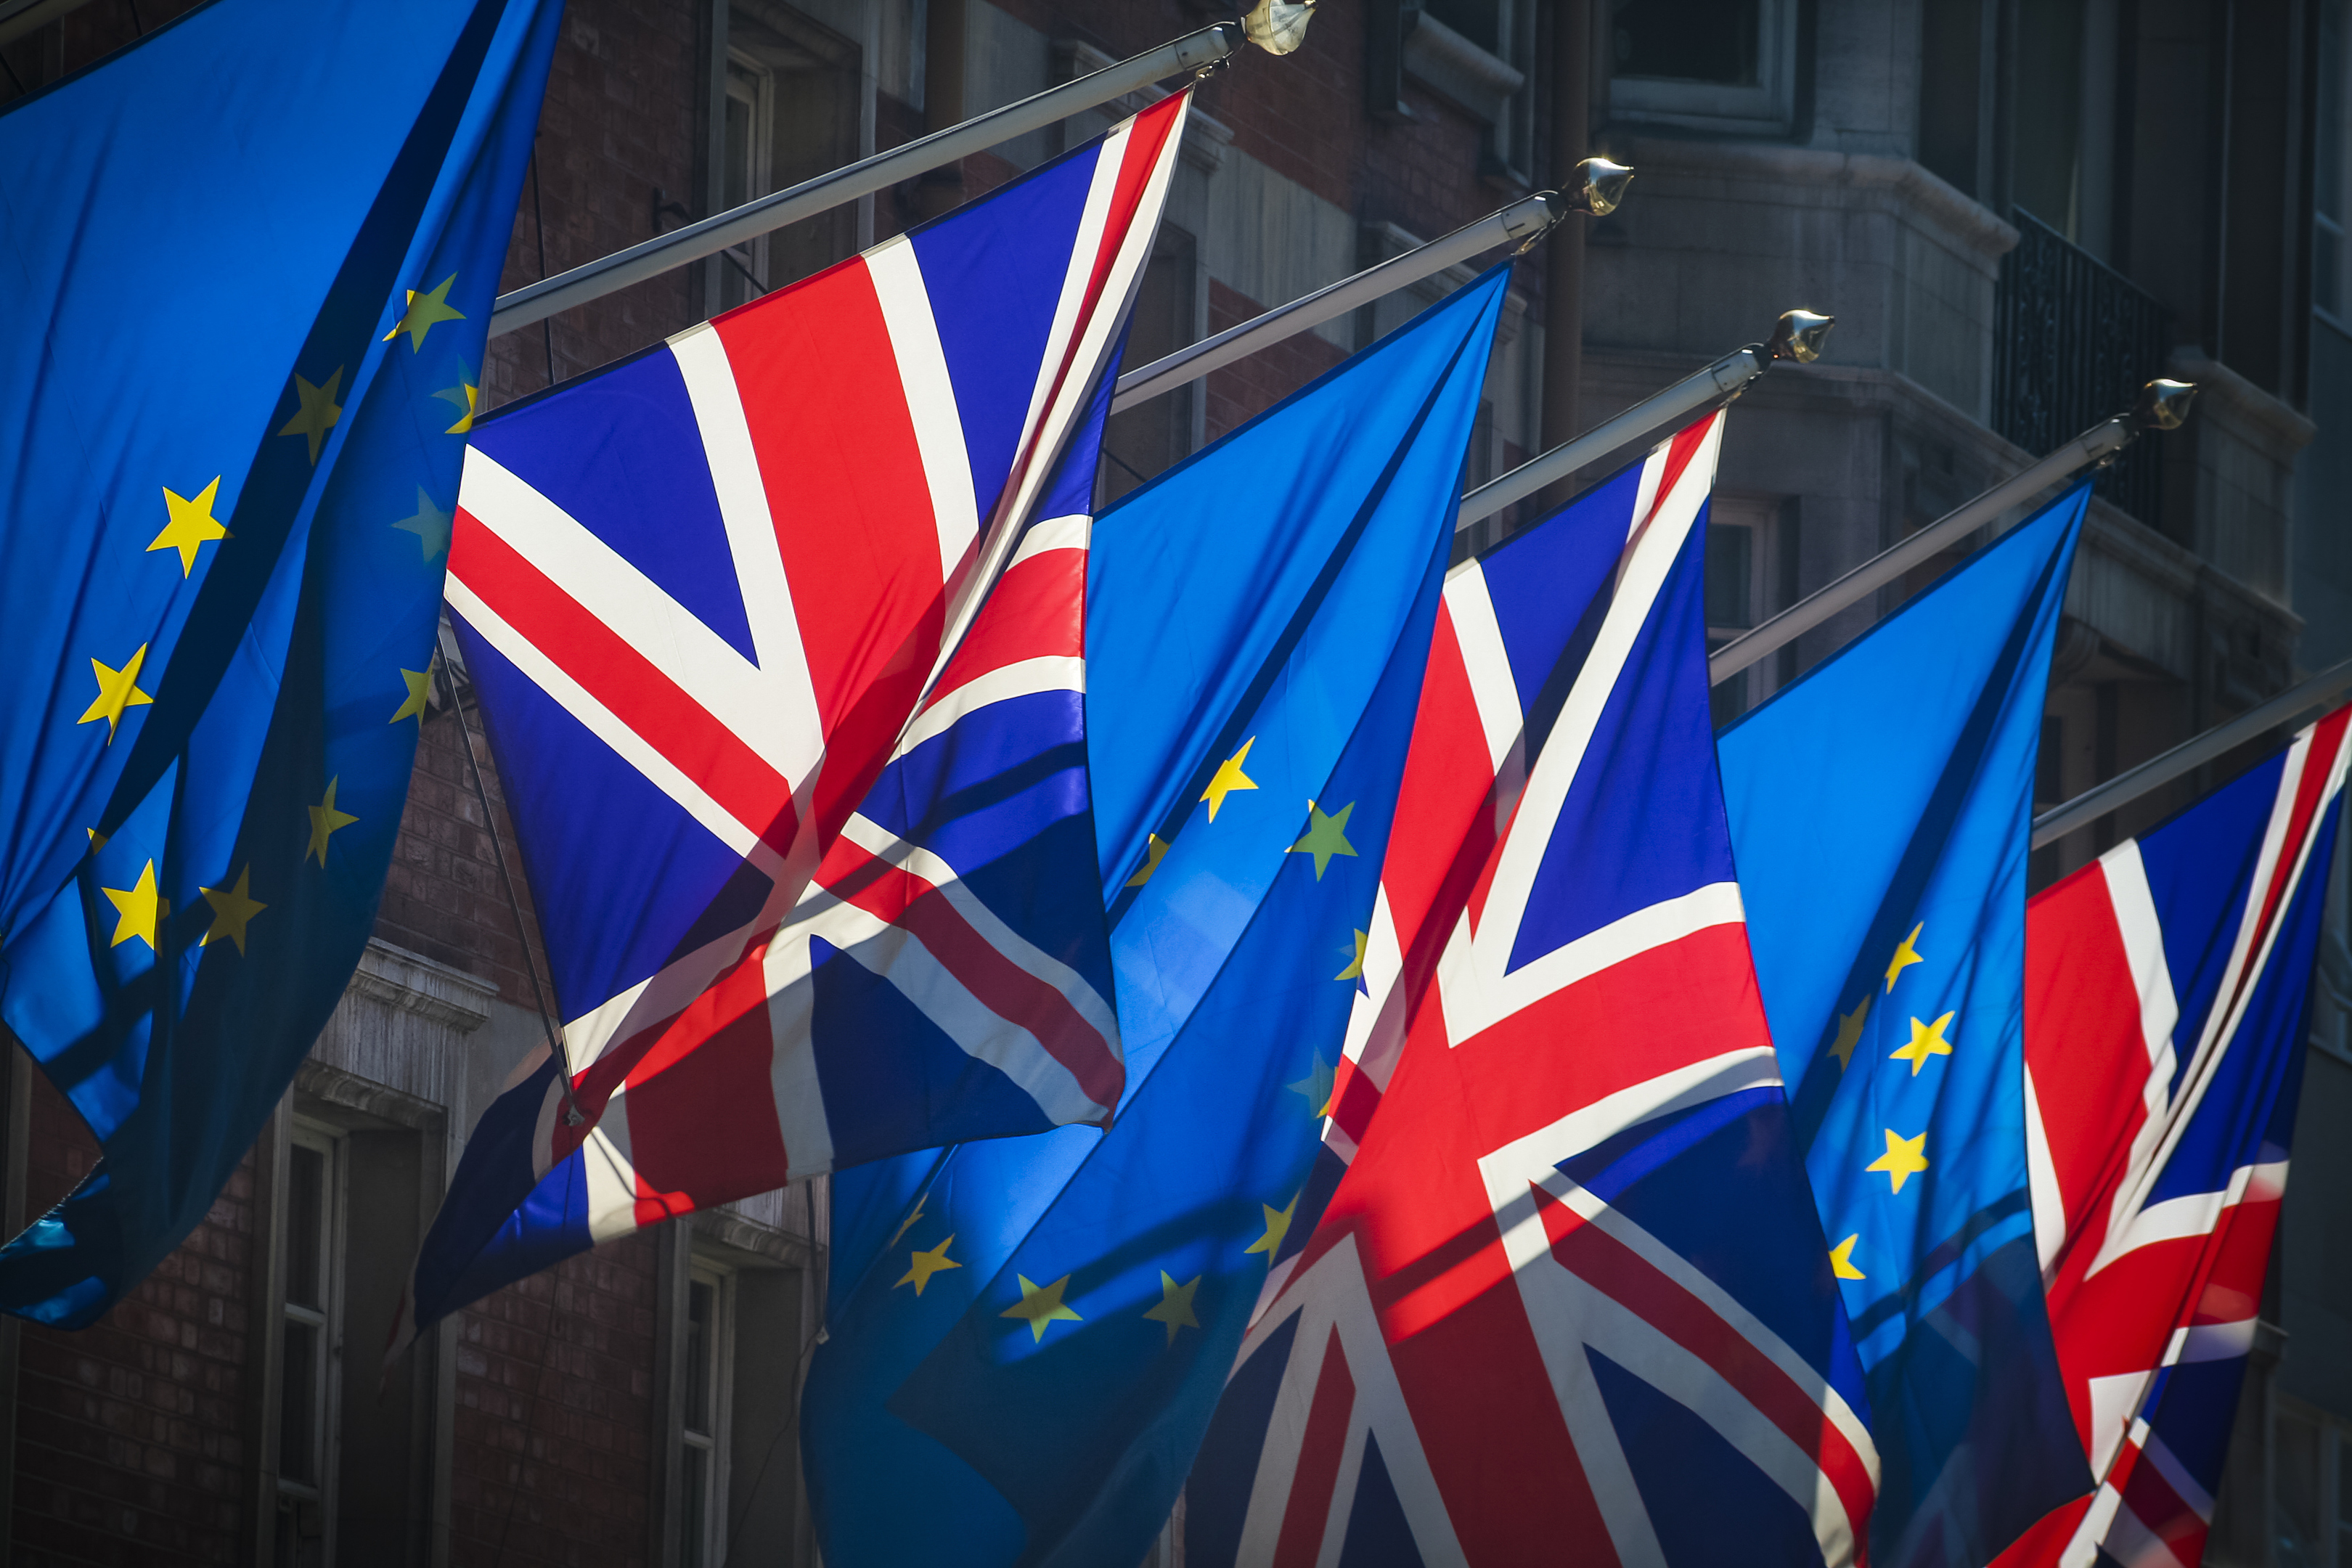 A quarter of firms (25%) said they had decided to focus more on UK trade in light of Brexit (Getty Images/iStock)